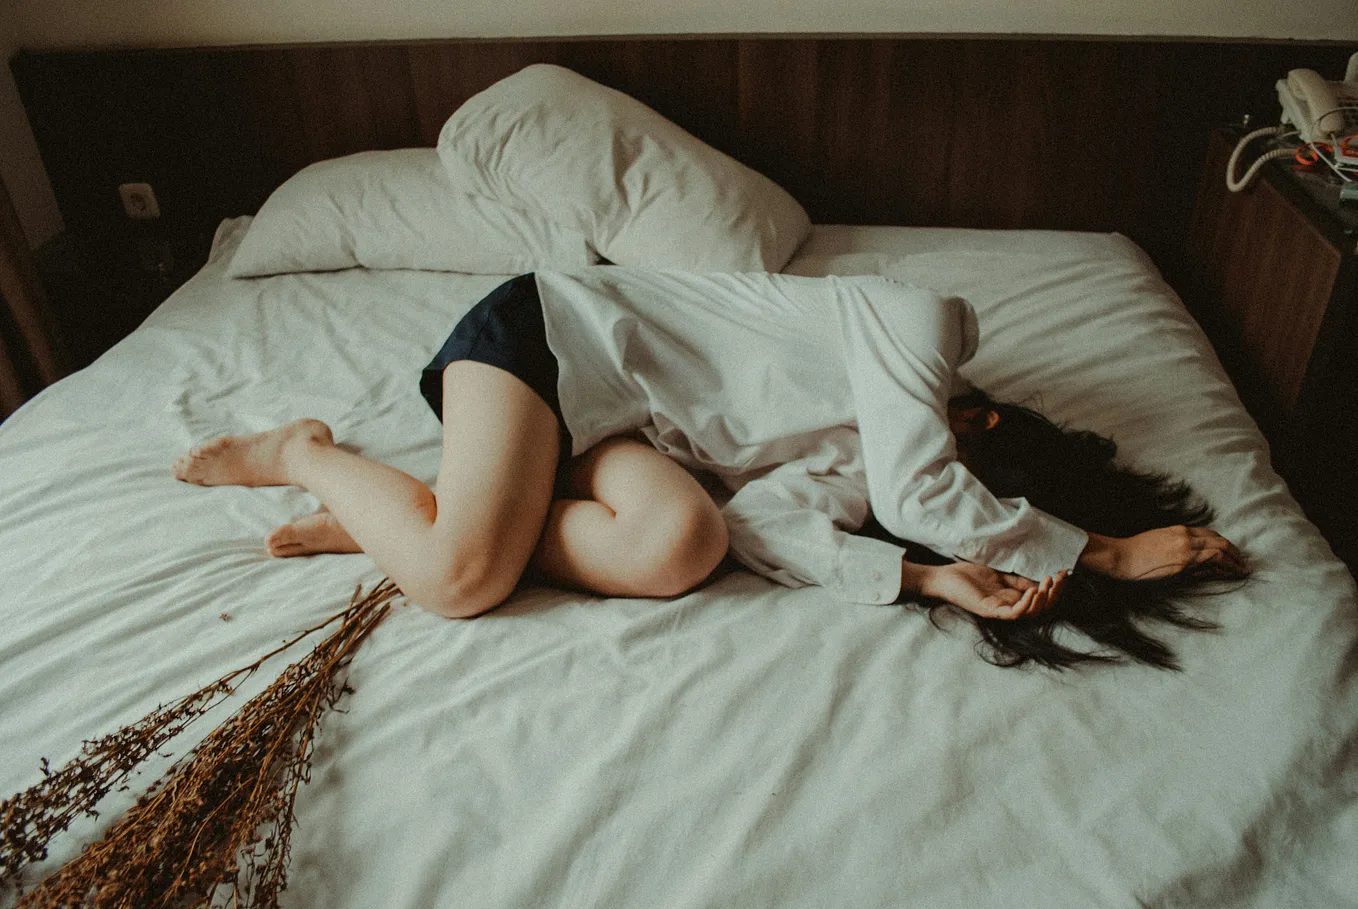 Girl curled up on an unmade bed with her arms over her face.